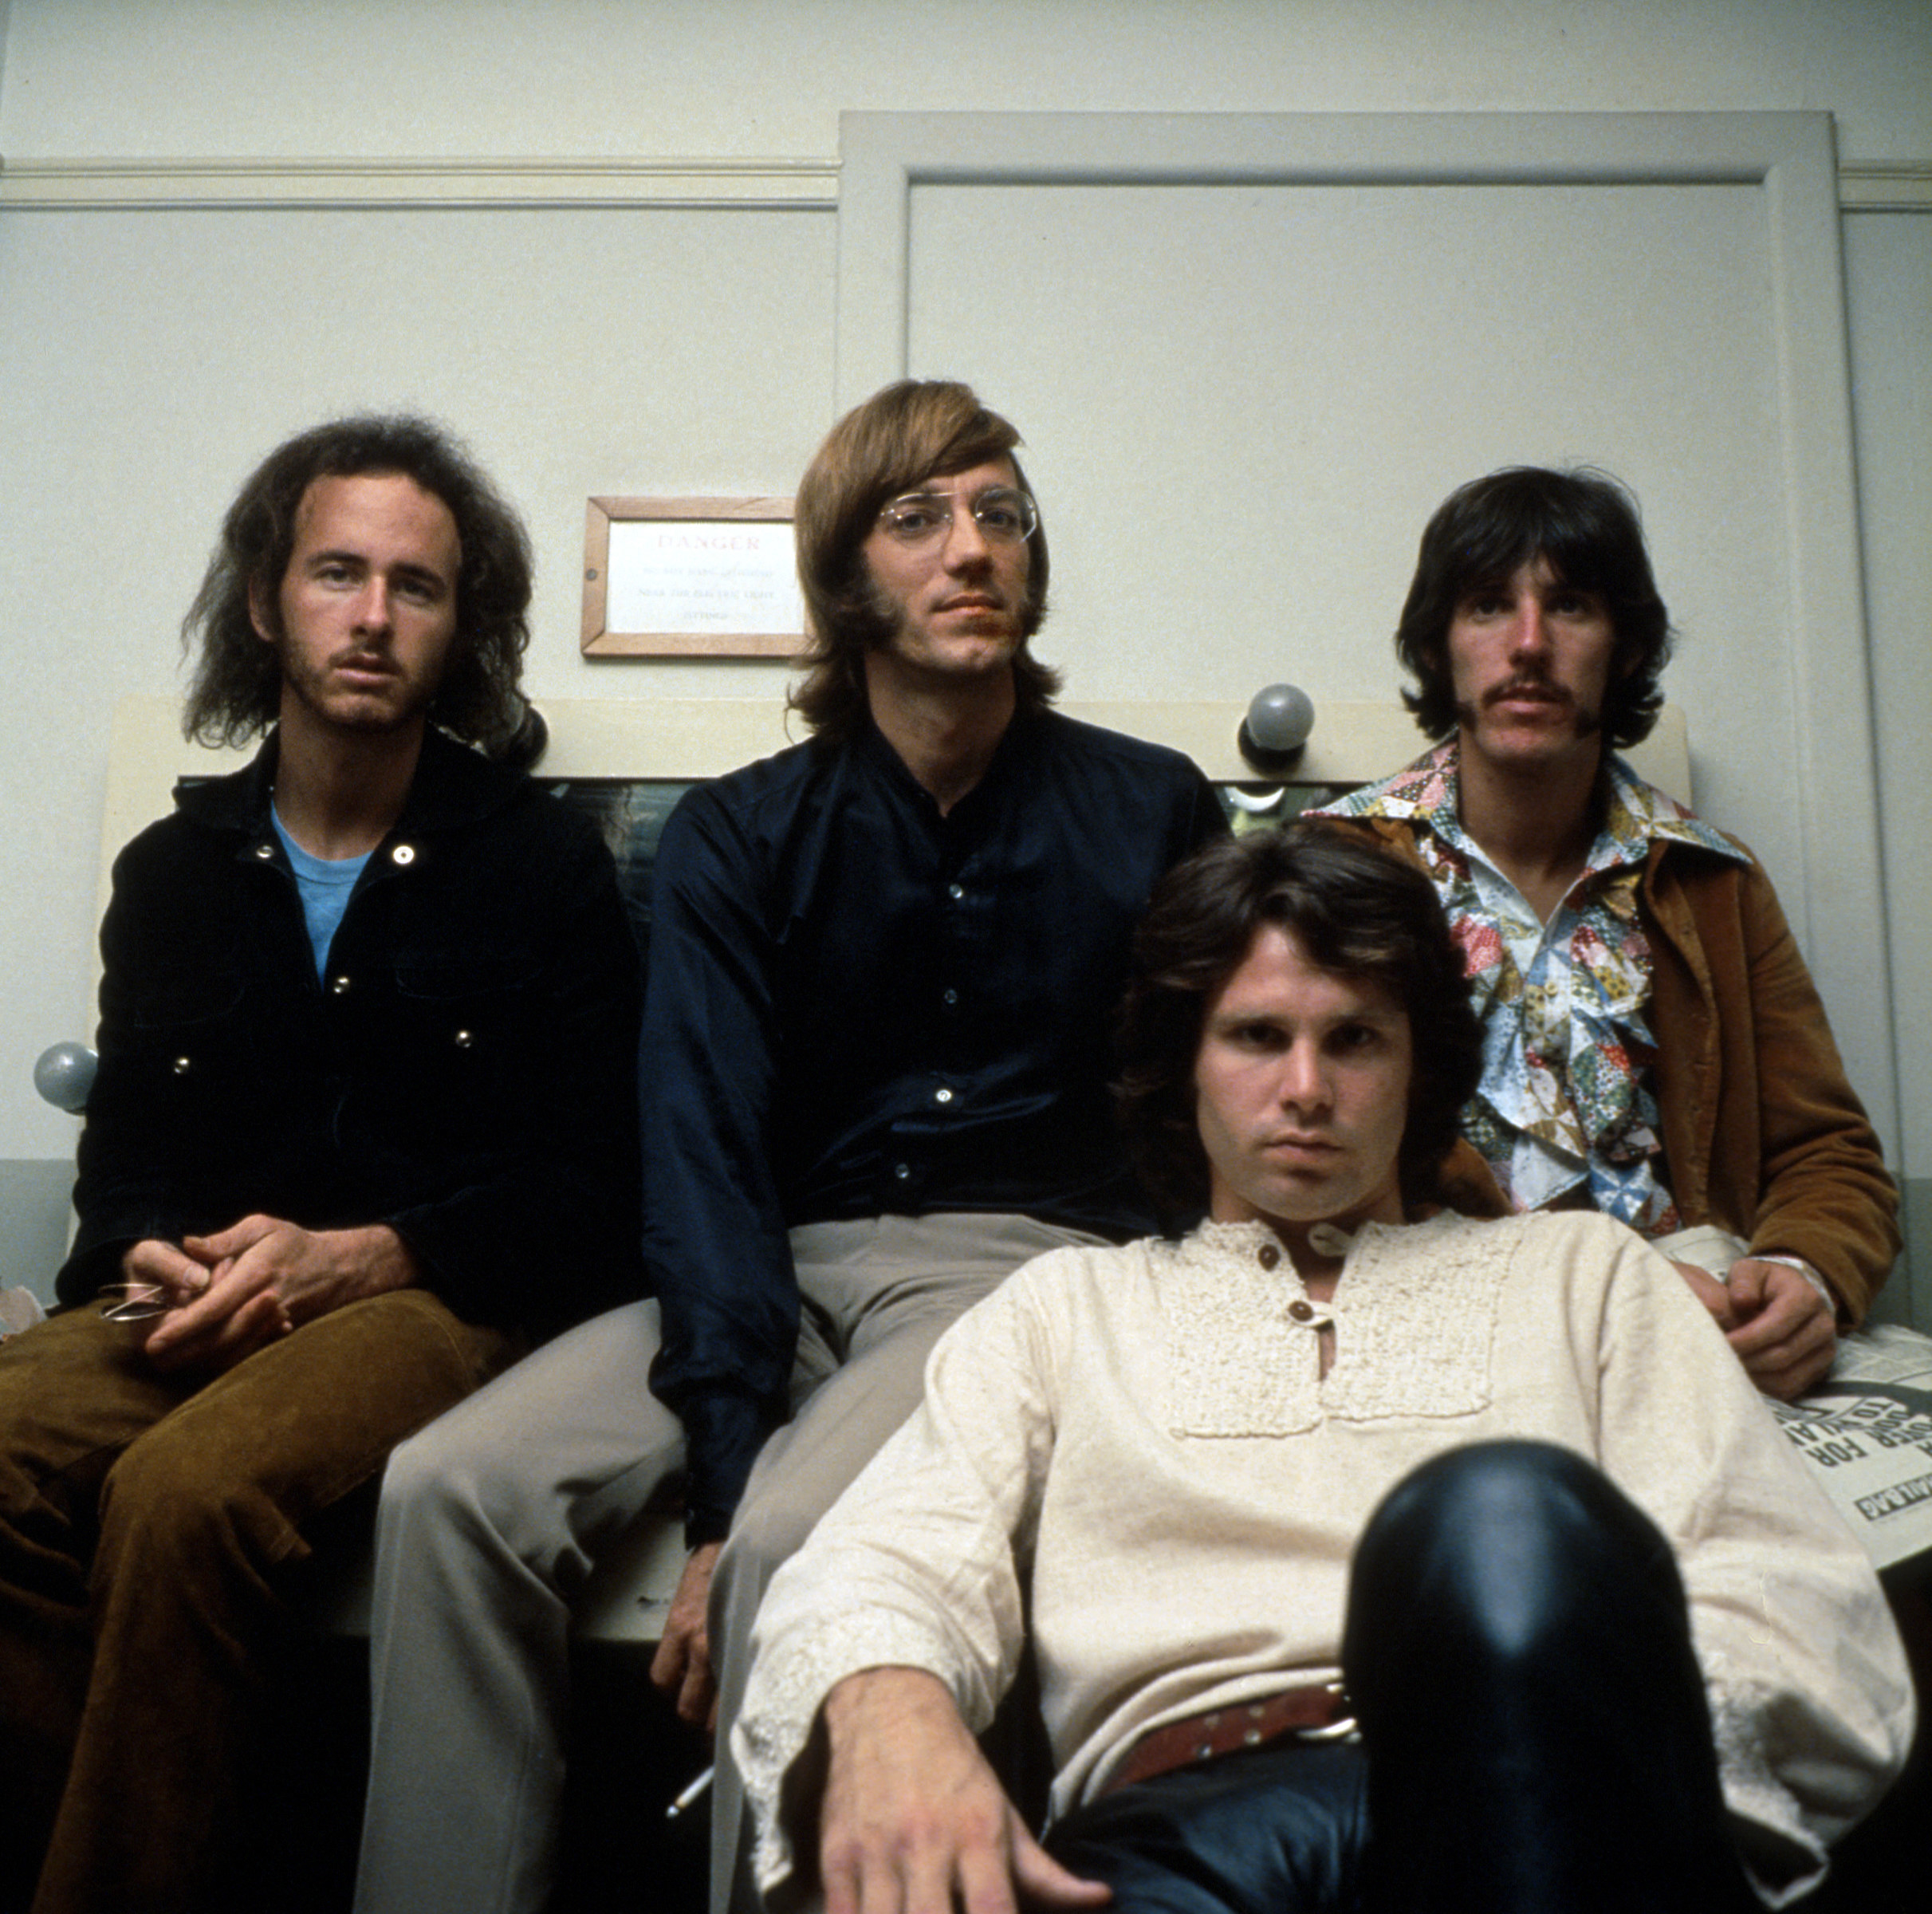 The members of the Doors pose together for a photo in `1970